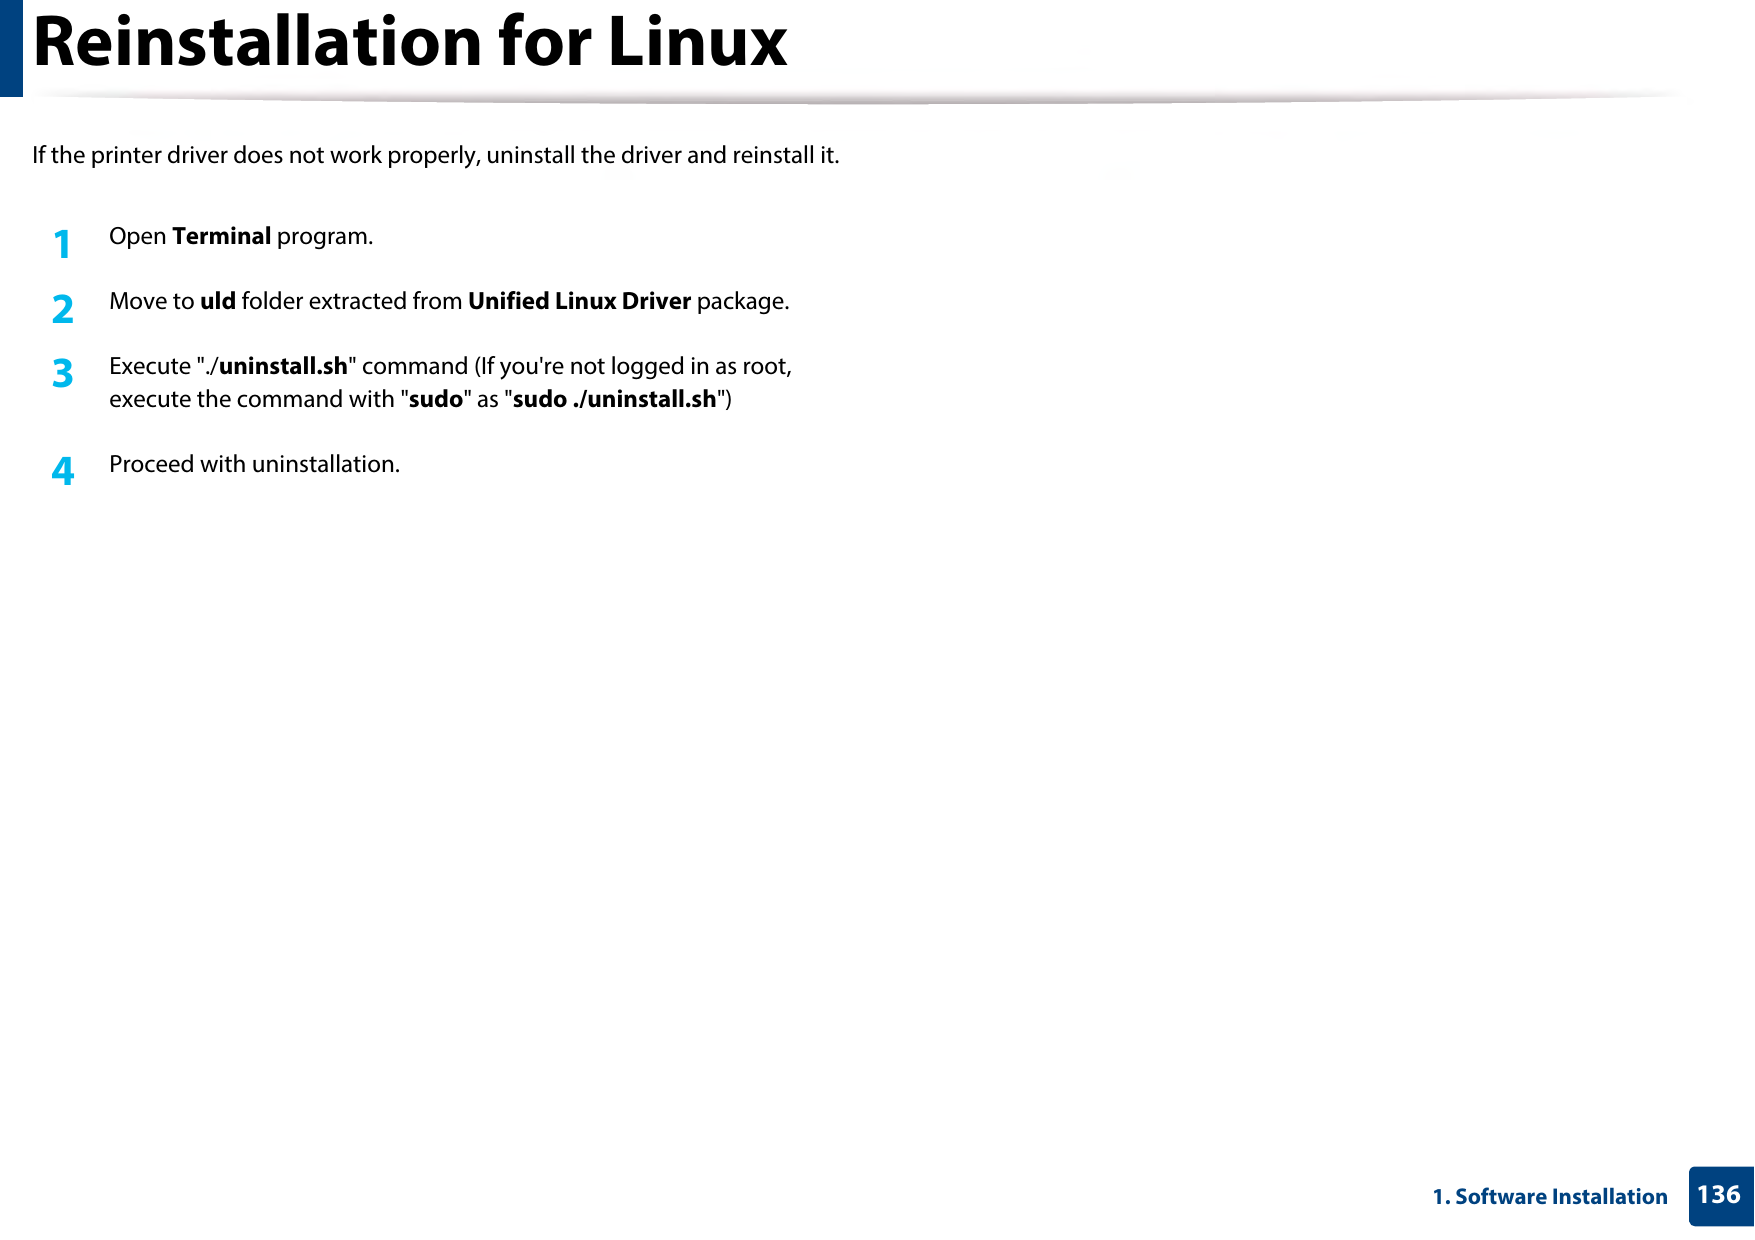 1361. Software InstallationReinstallation for LinuxIf the printer driver does not work properly, uninstall the driver and reinstall it.1Open Terminal program.2  Move to uld folder extracted from Unified Linux Driver package.3  Execute &quot;./uninstall.sh&quot; command (If you&apos;re not logged in as root, execute the command with &quot;sudo&quot; as &quot;sudo ./uninstall.sh&quot;)4  Proceed with uninstallation.